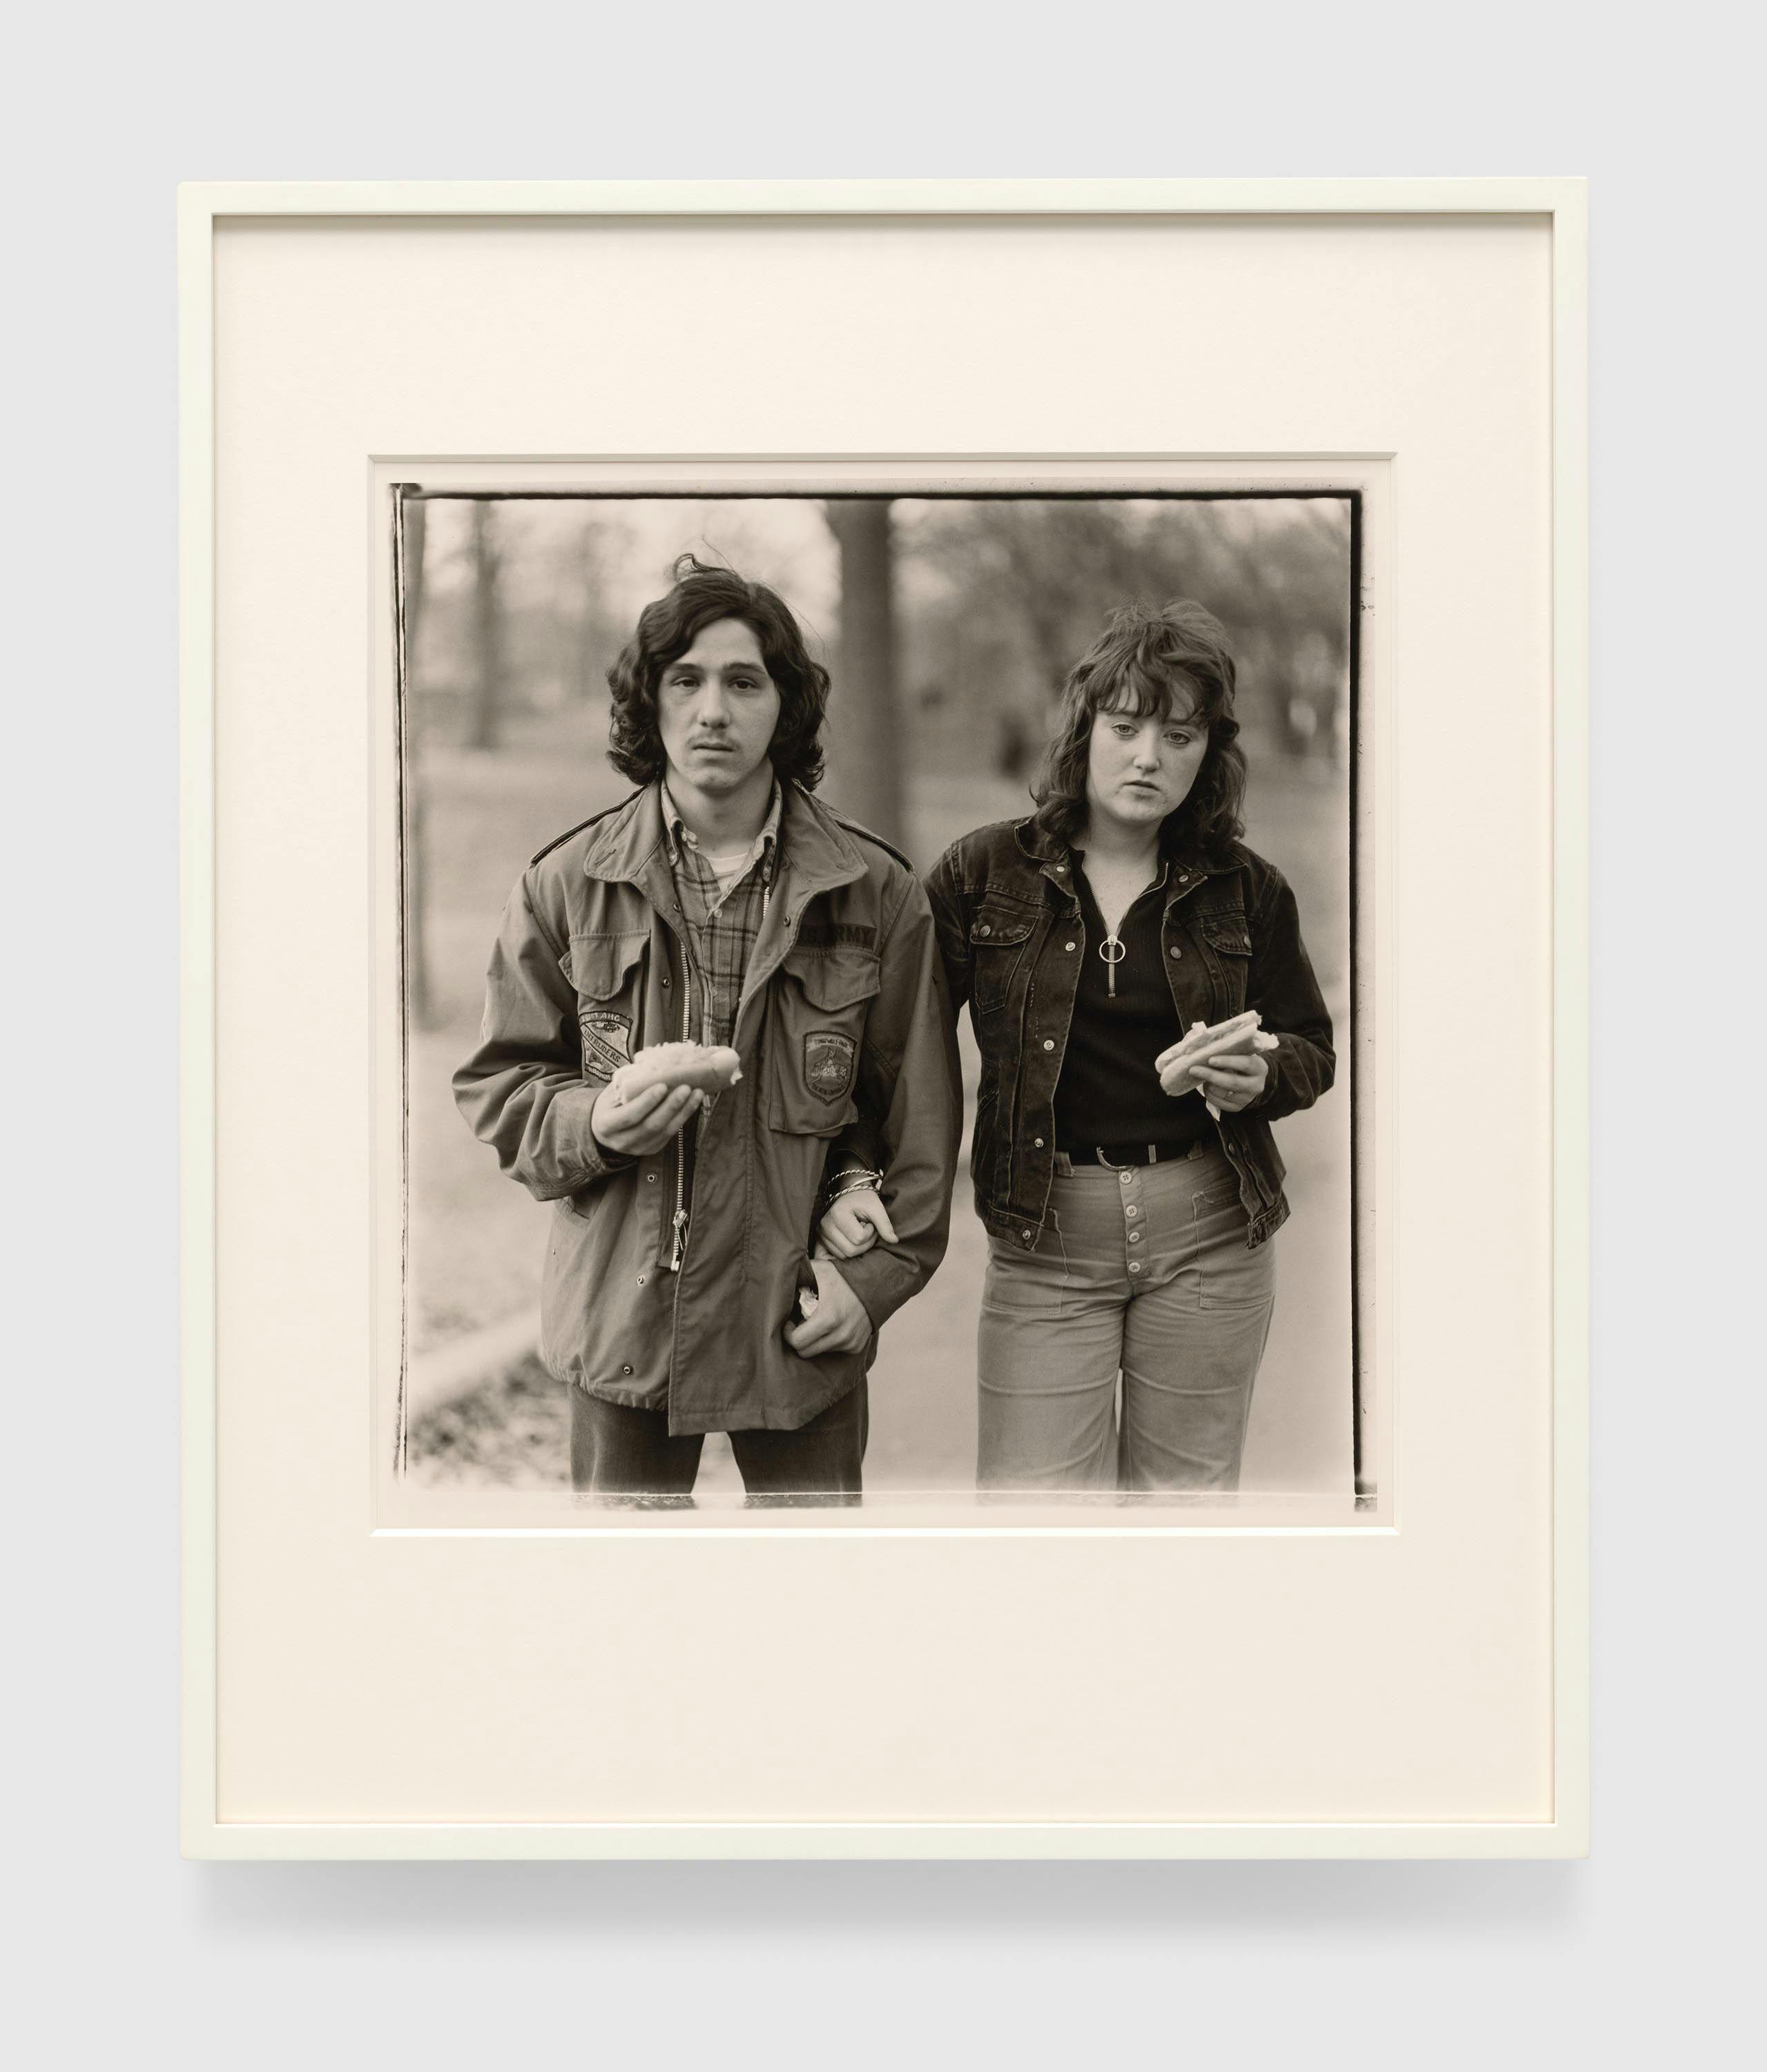 A Gelatin silver print by Diane Arbus, titled A young man and his girlfriend with hot dogs in the park, N.Y.C. 1971, dated 1971.